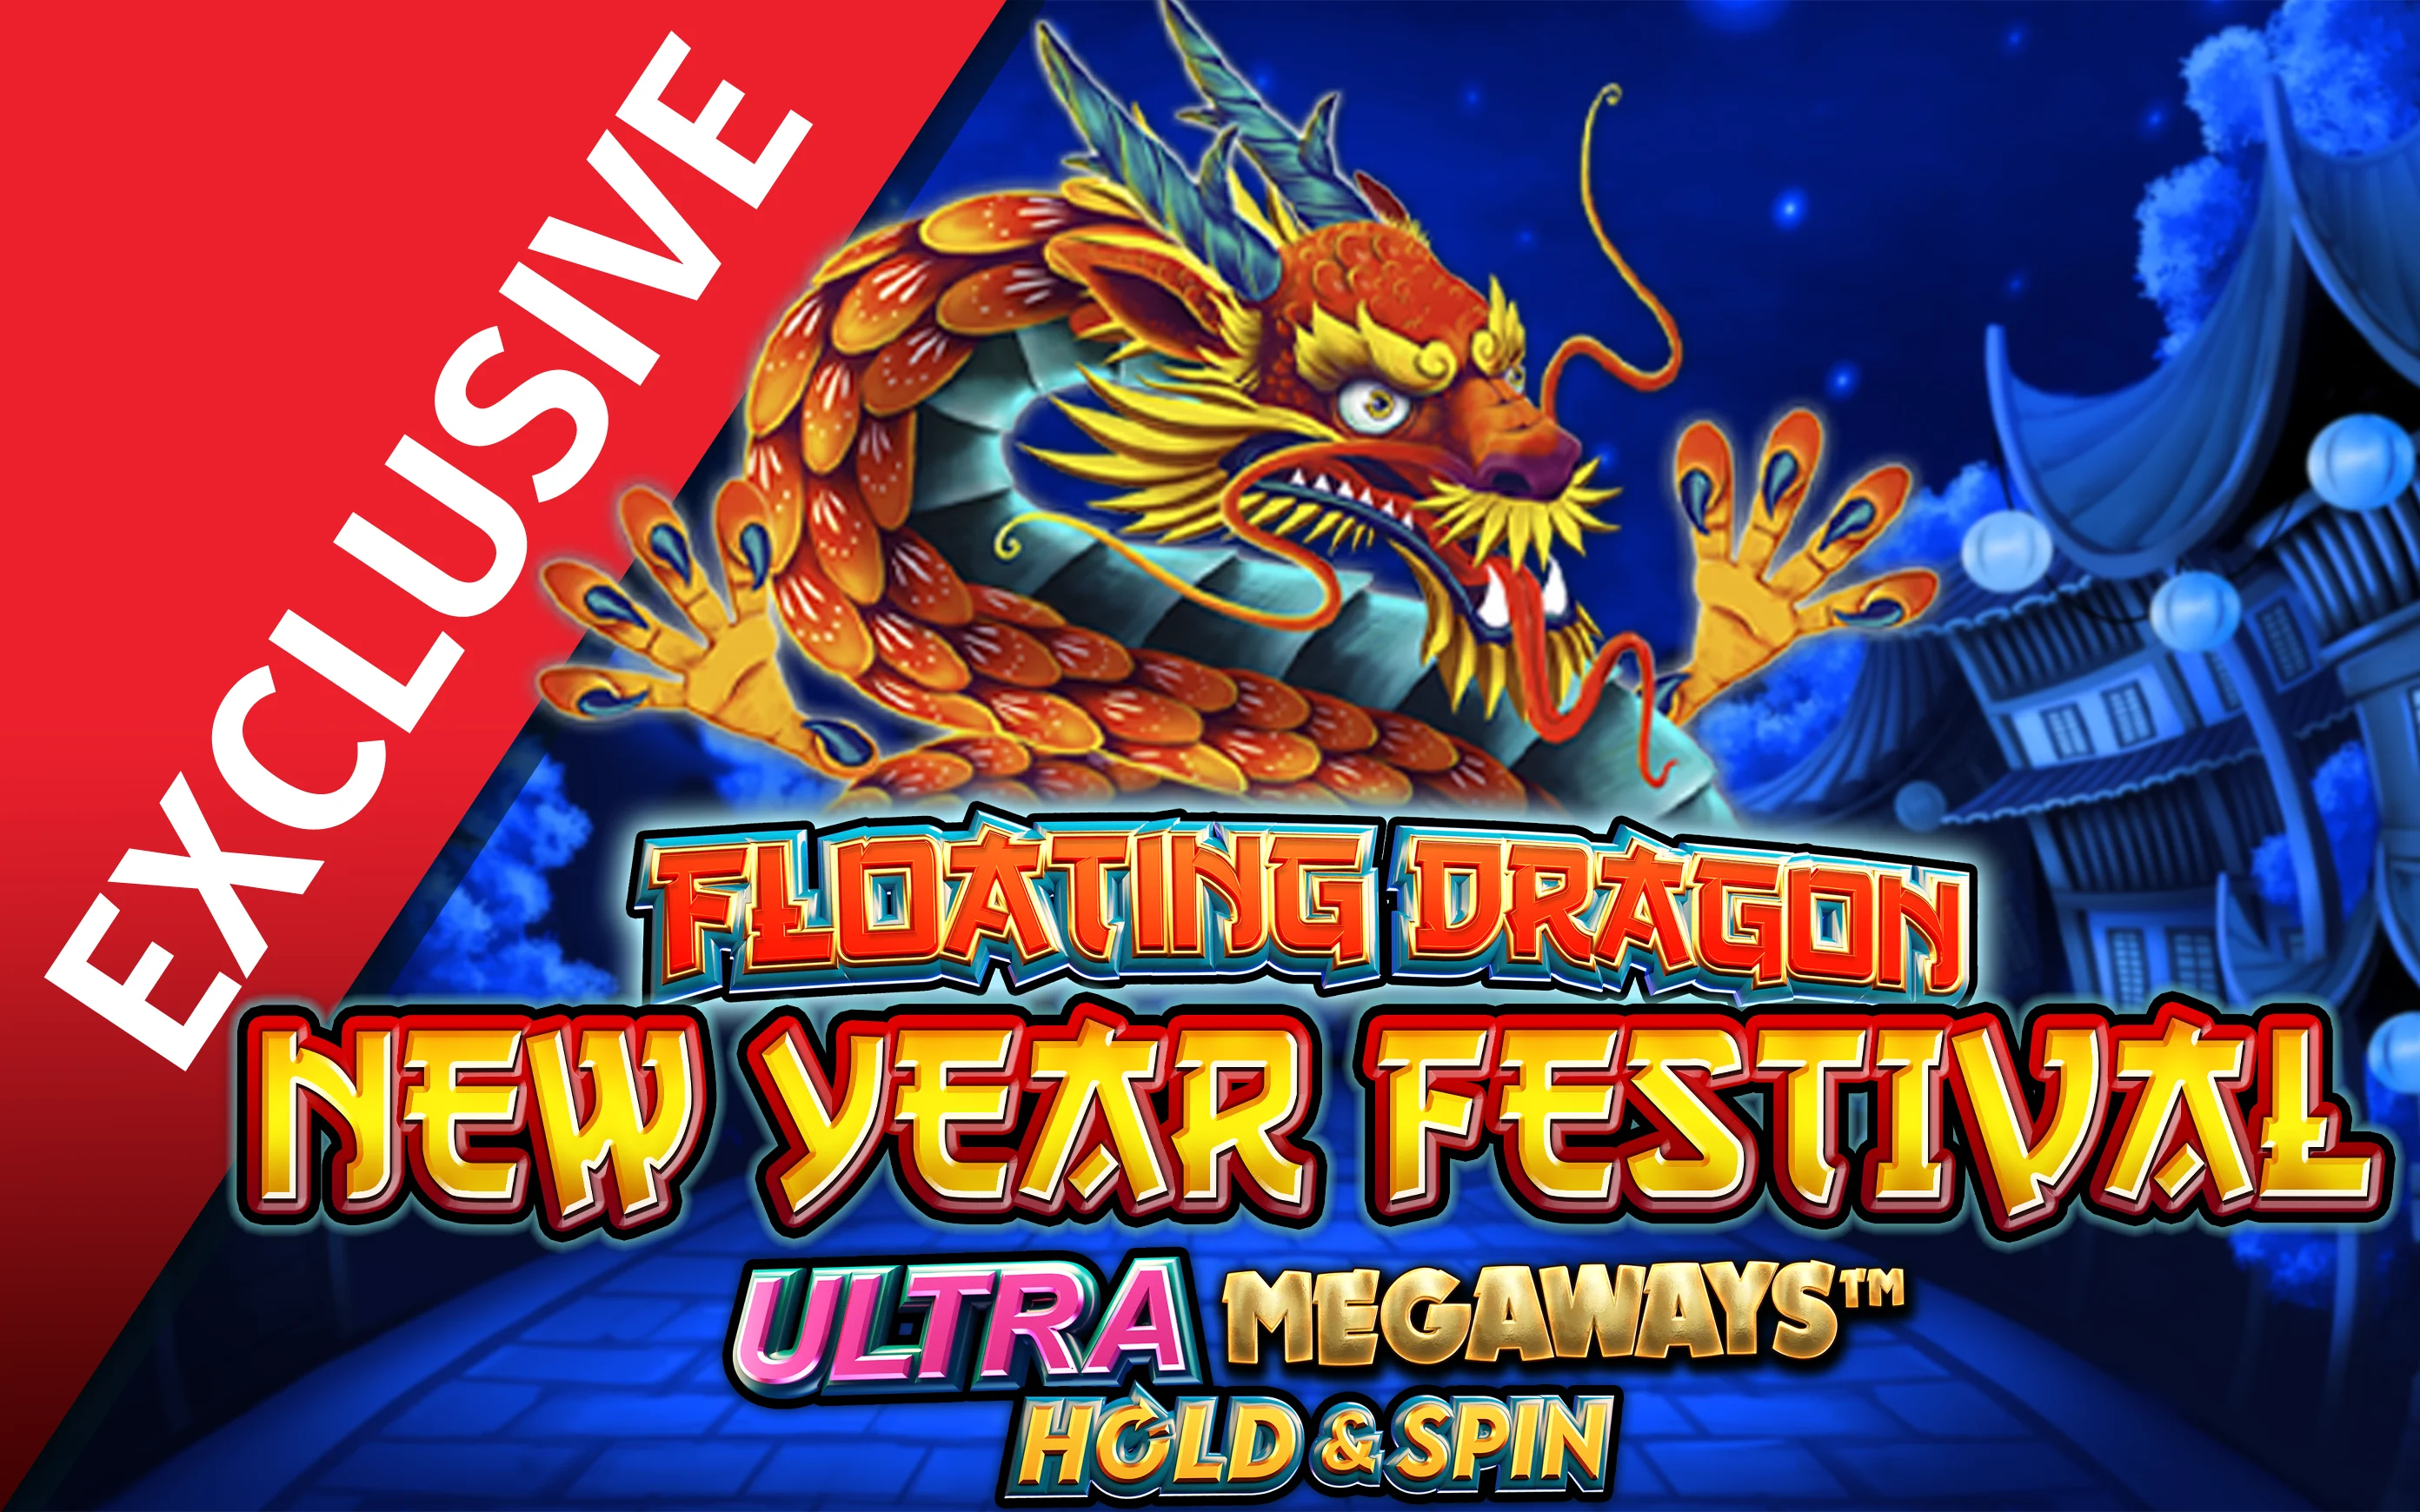 Play Floating Dragon New Year Festival Ultra Megaways™ Hold & Spin on StarcasinoBE online casino